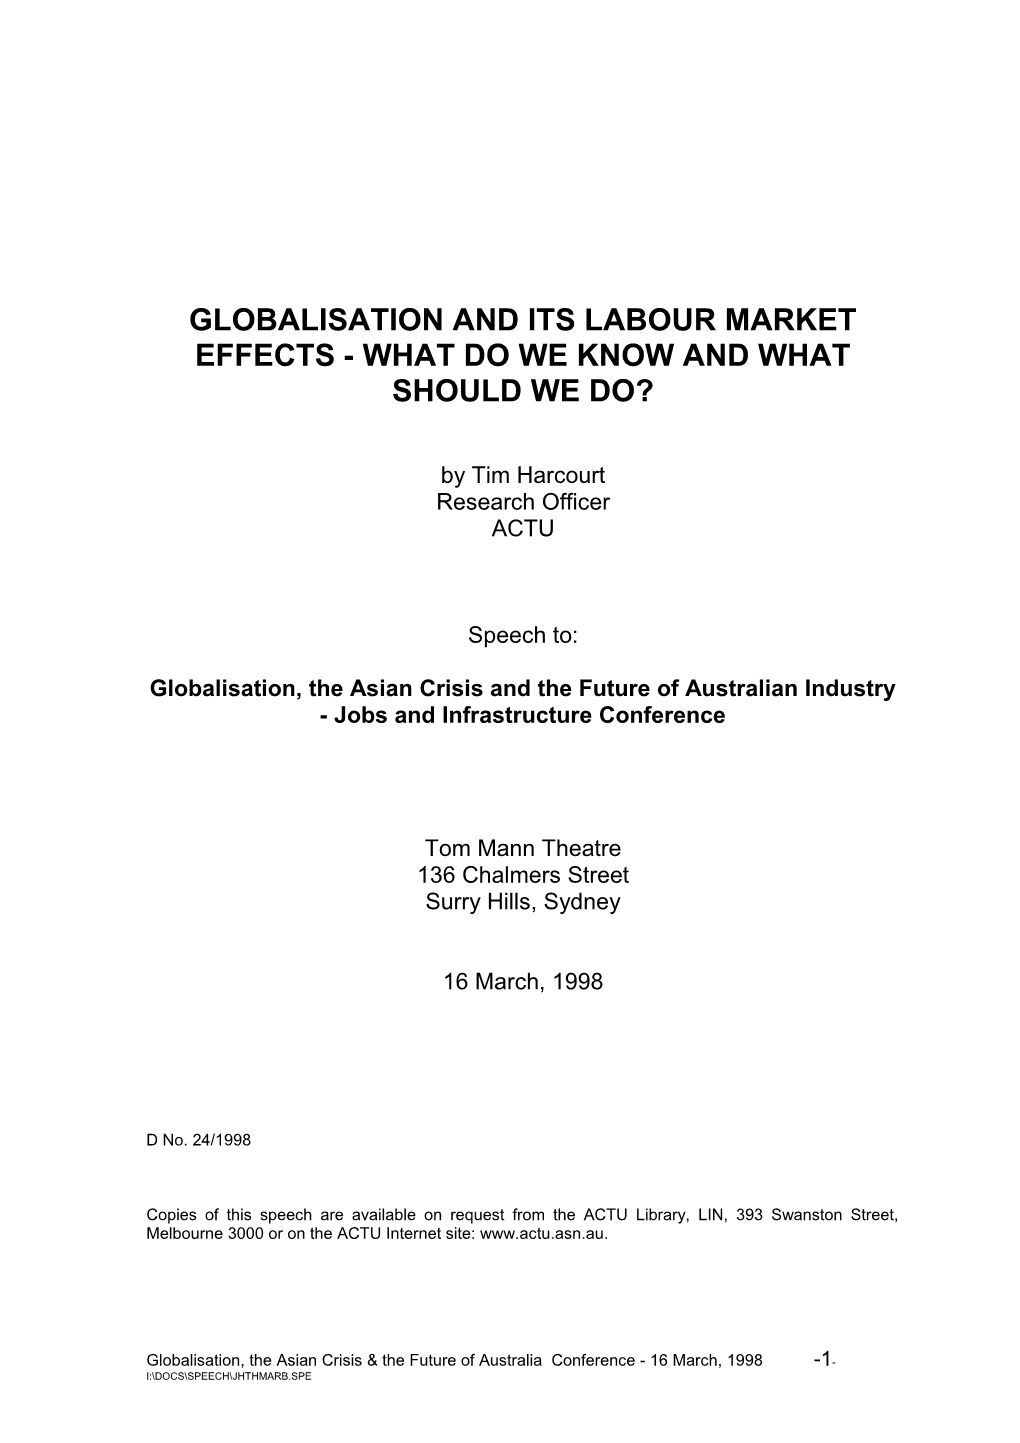 Globalisation and Its Labour Market Effects - What Do We Know and What Should We Do?